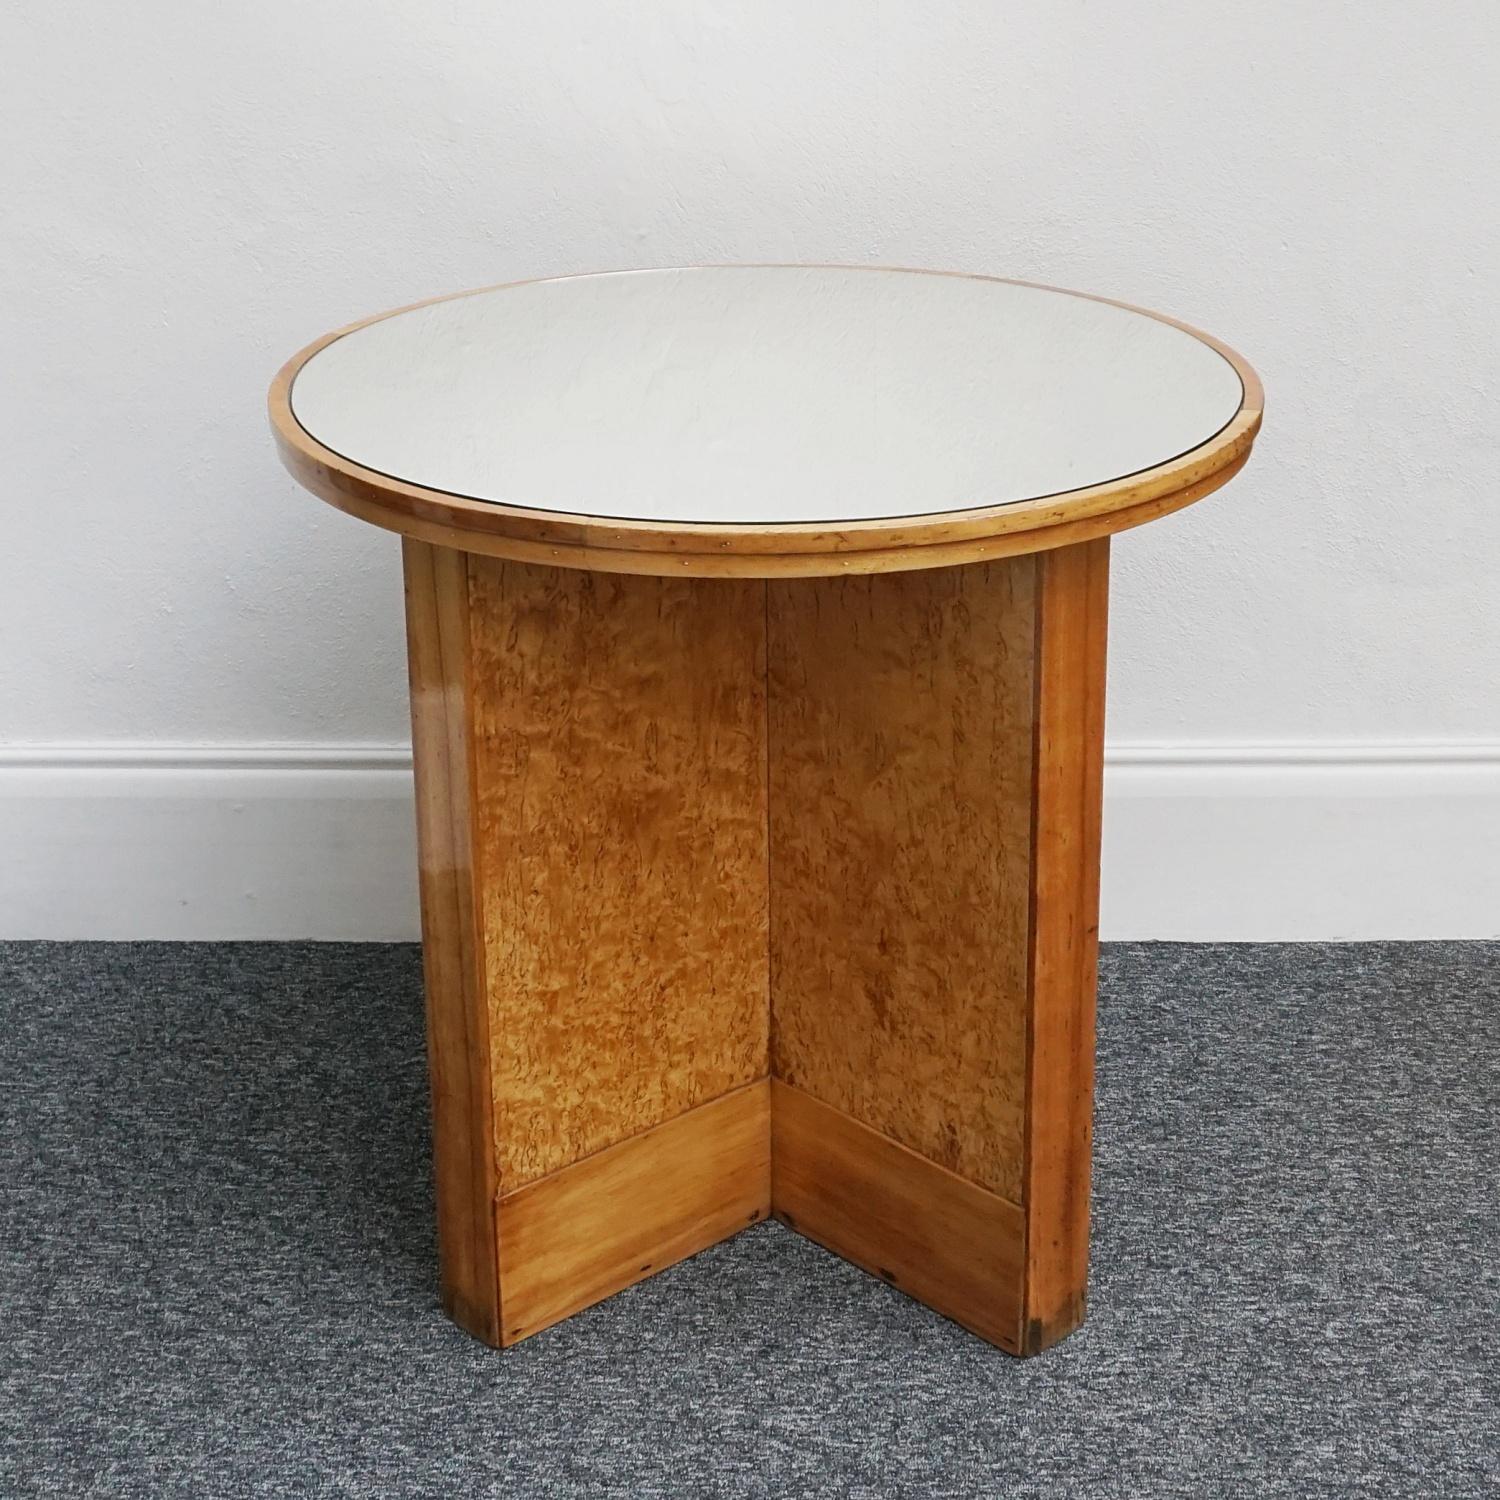 An Art Deco mirrored topped Centre Table. Karlian birch veneered with figured walnut banding. Replacement mirrored glass top. 

Dimensions: H 86cm D 91.5cm 

Origin: English

Date: Circa 1935

Item Number: 2704226

All of our furniture is